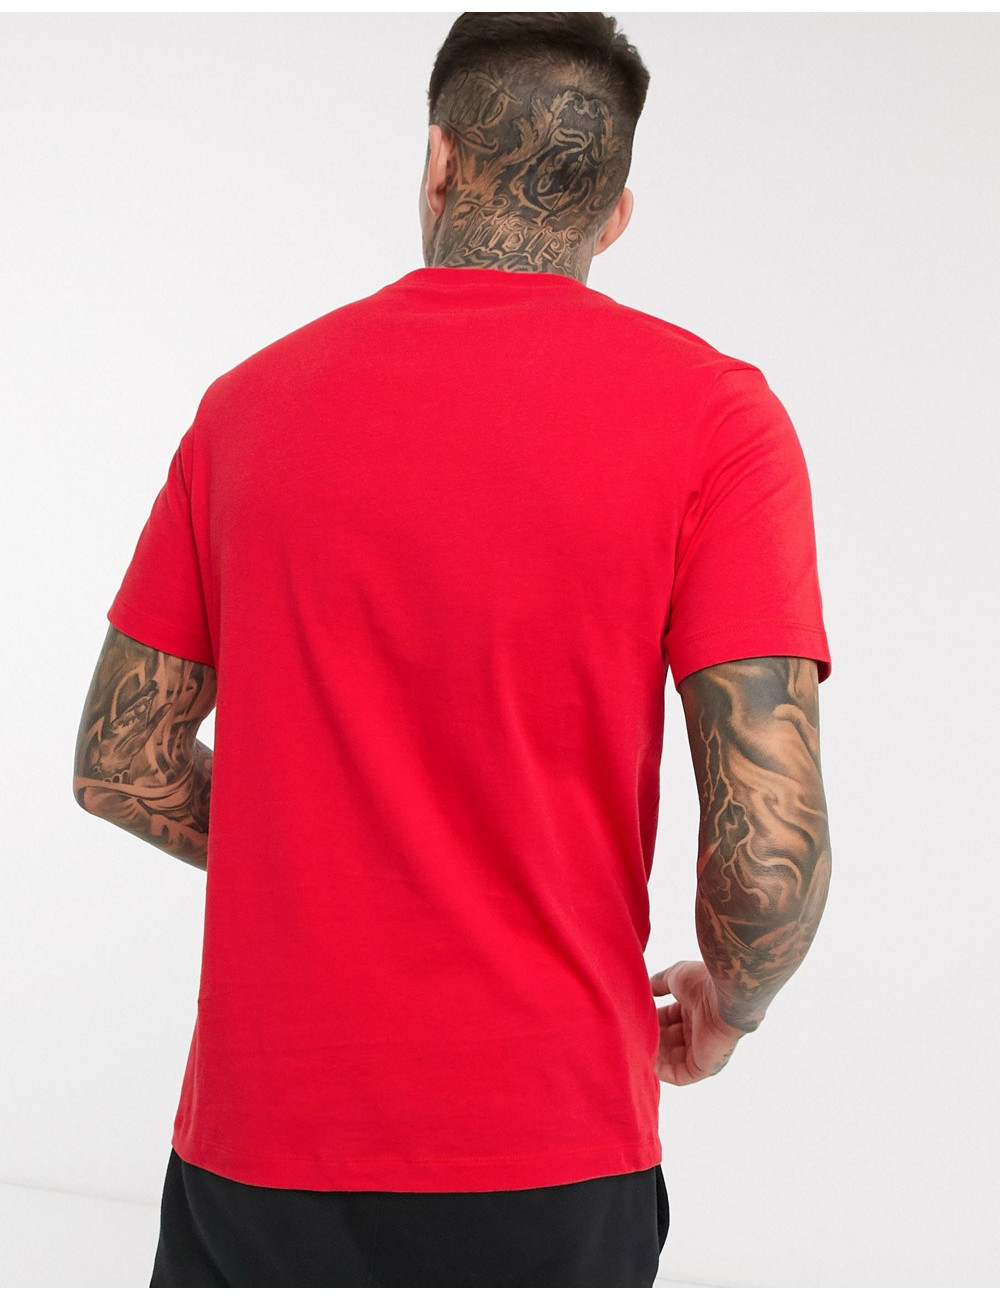 Nike Club t-shirt in red